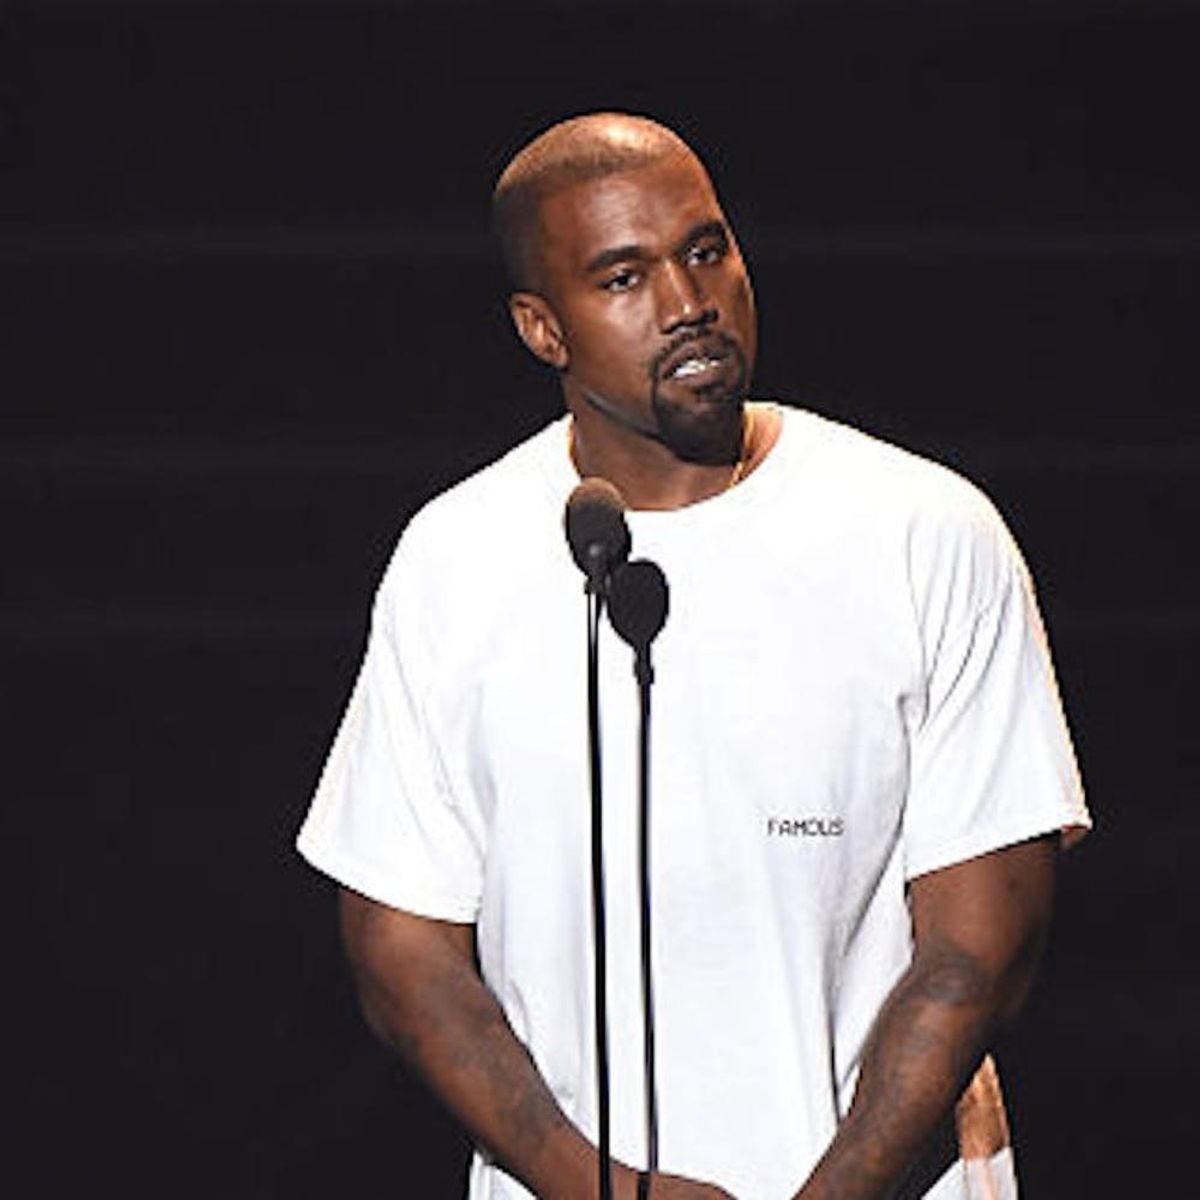 Morning Buzz: Kanye West Has Been Hospitalized for His Own Safety + More